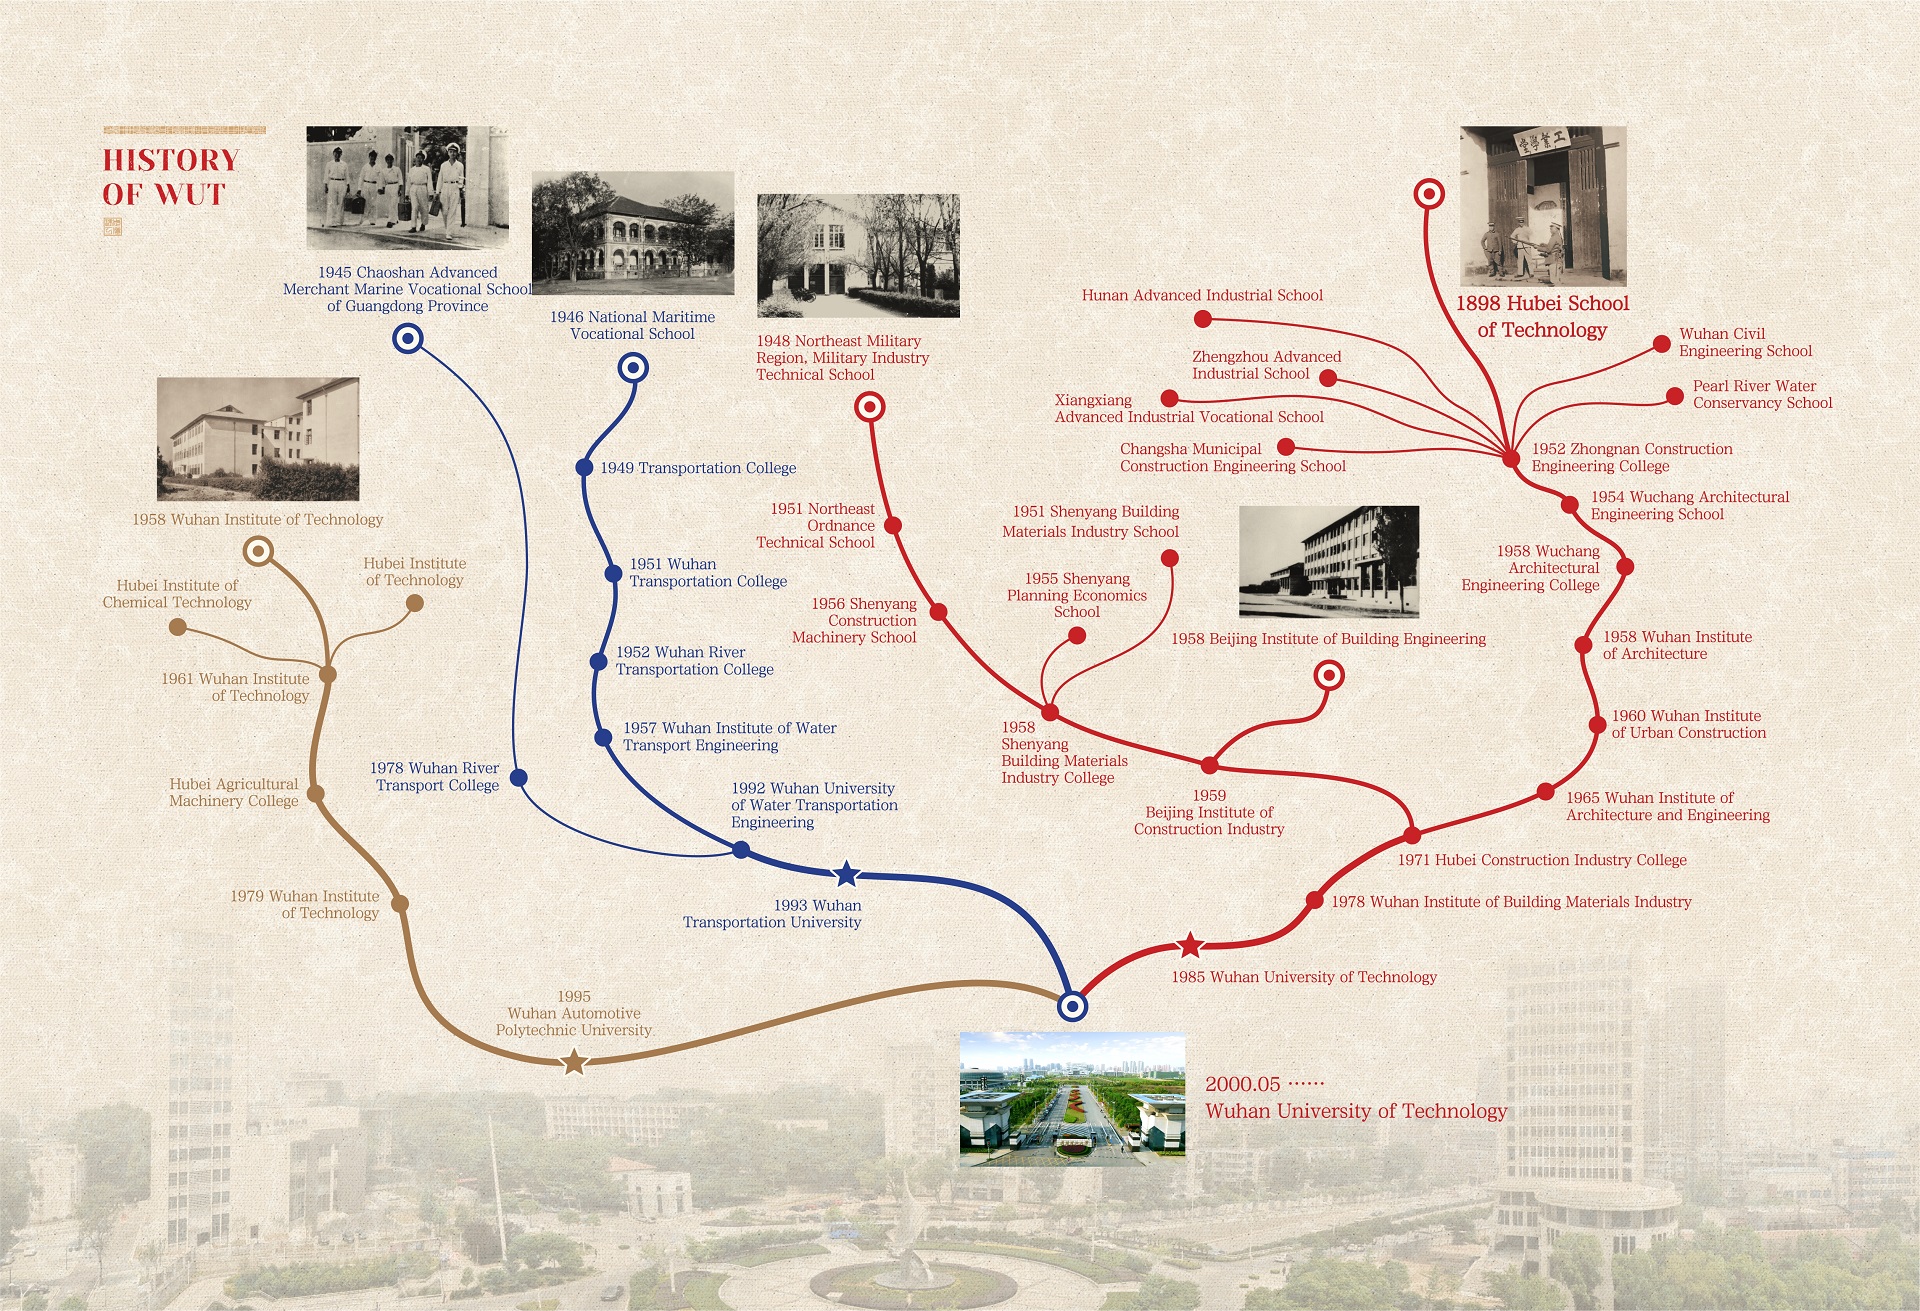 The history of Wuhan University of Technology